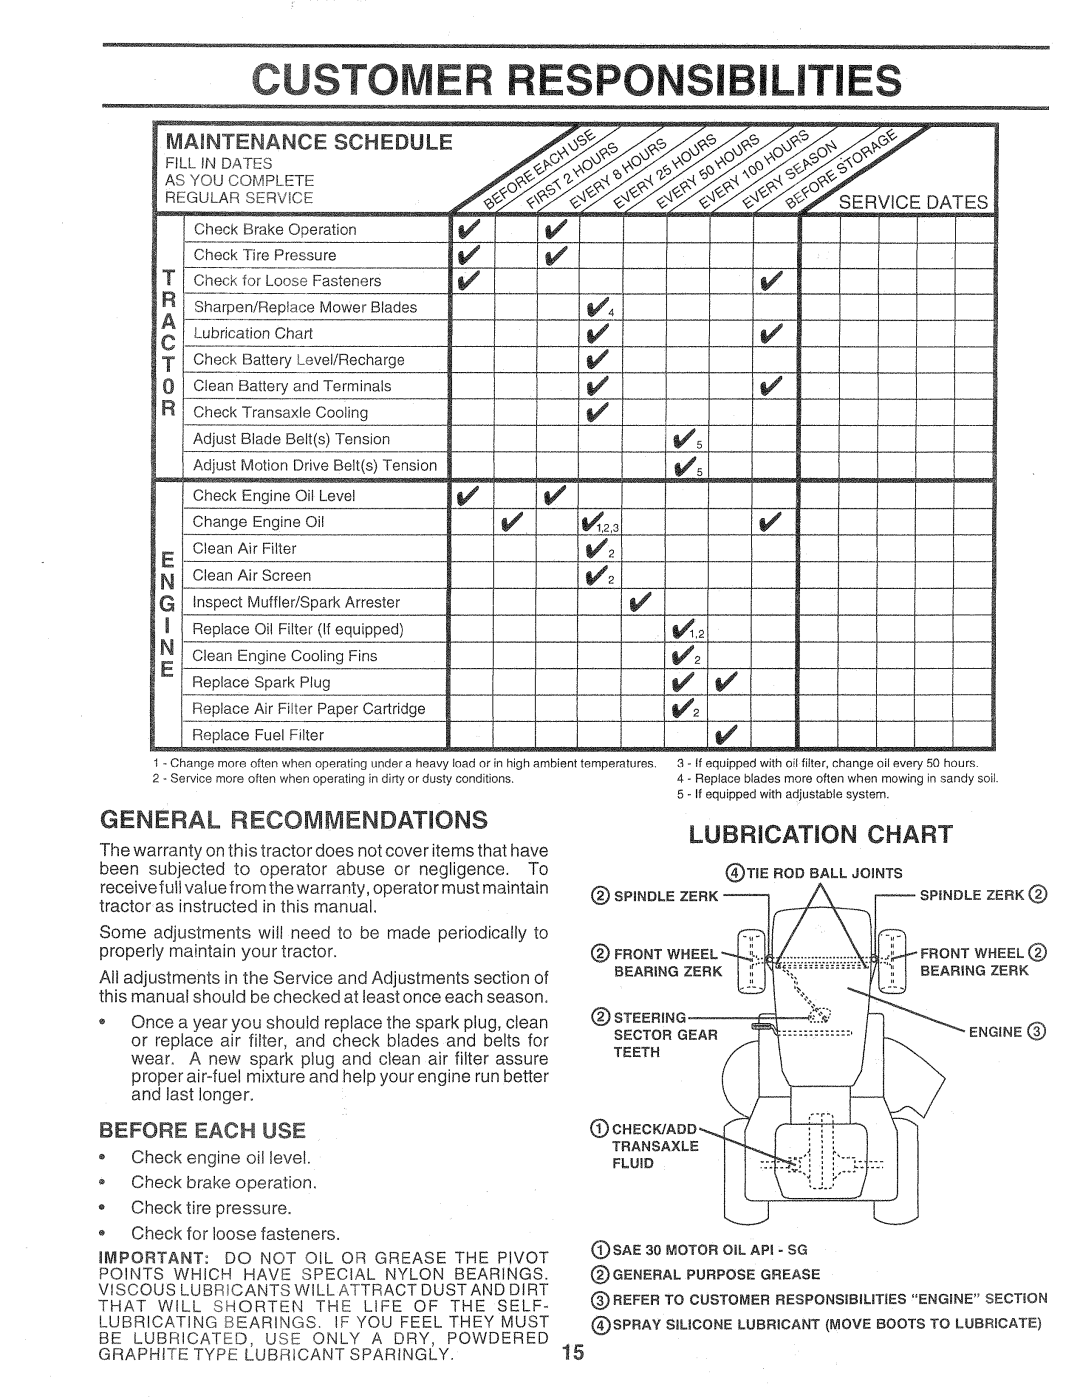 Sears 917.257720 owner manual CUSTOME RESPONSiBiLiTiES, General Recommendations, Lubrication Chart, Maintenance, Schedule 